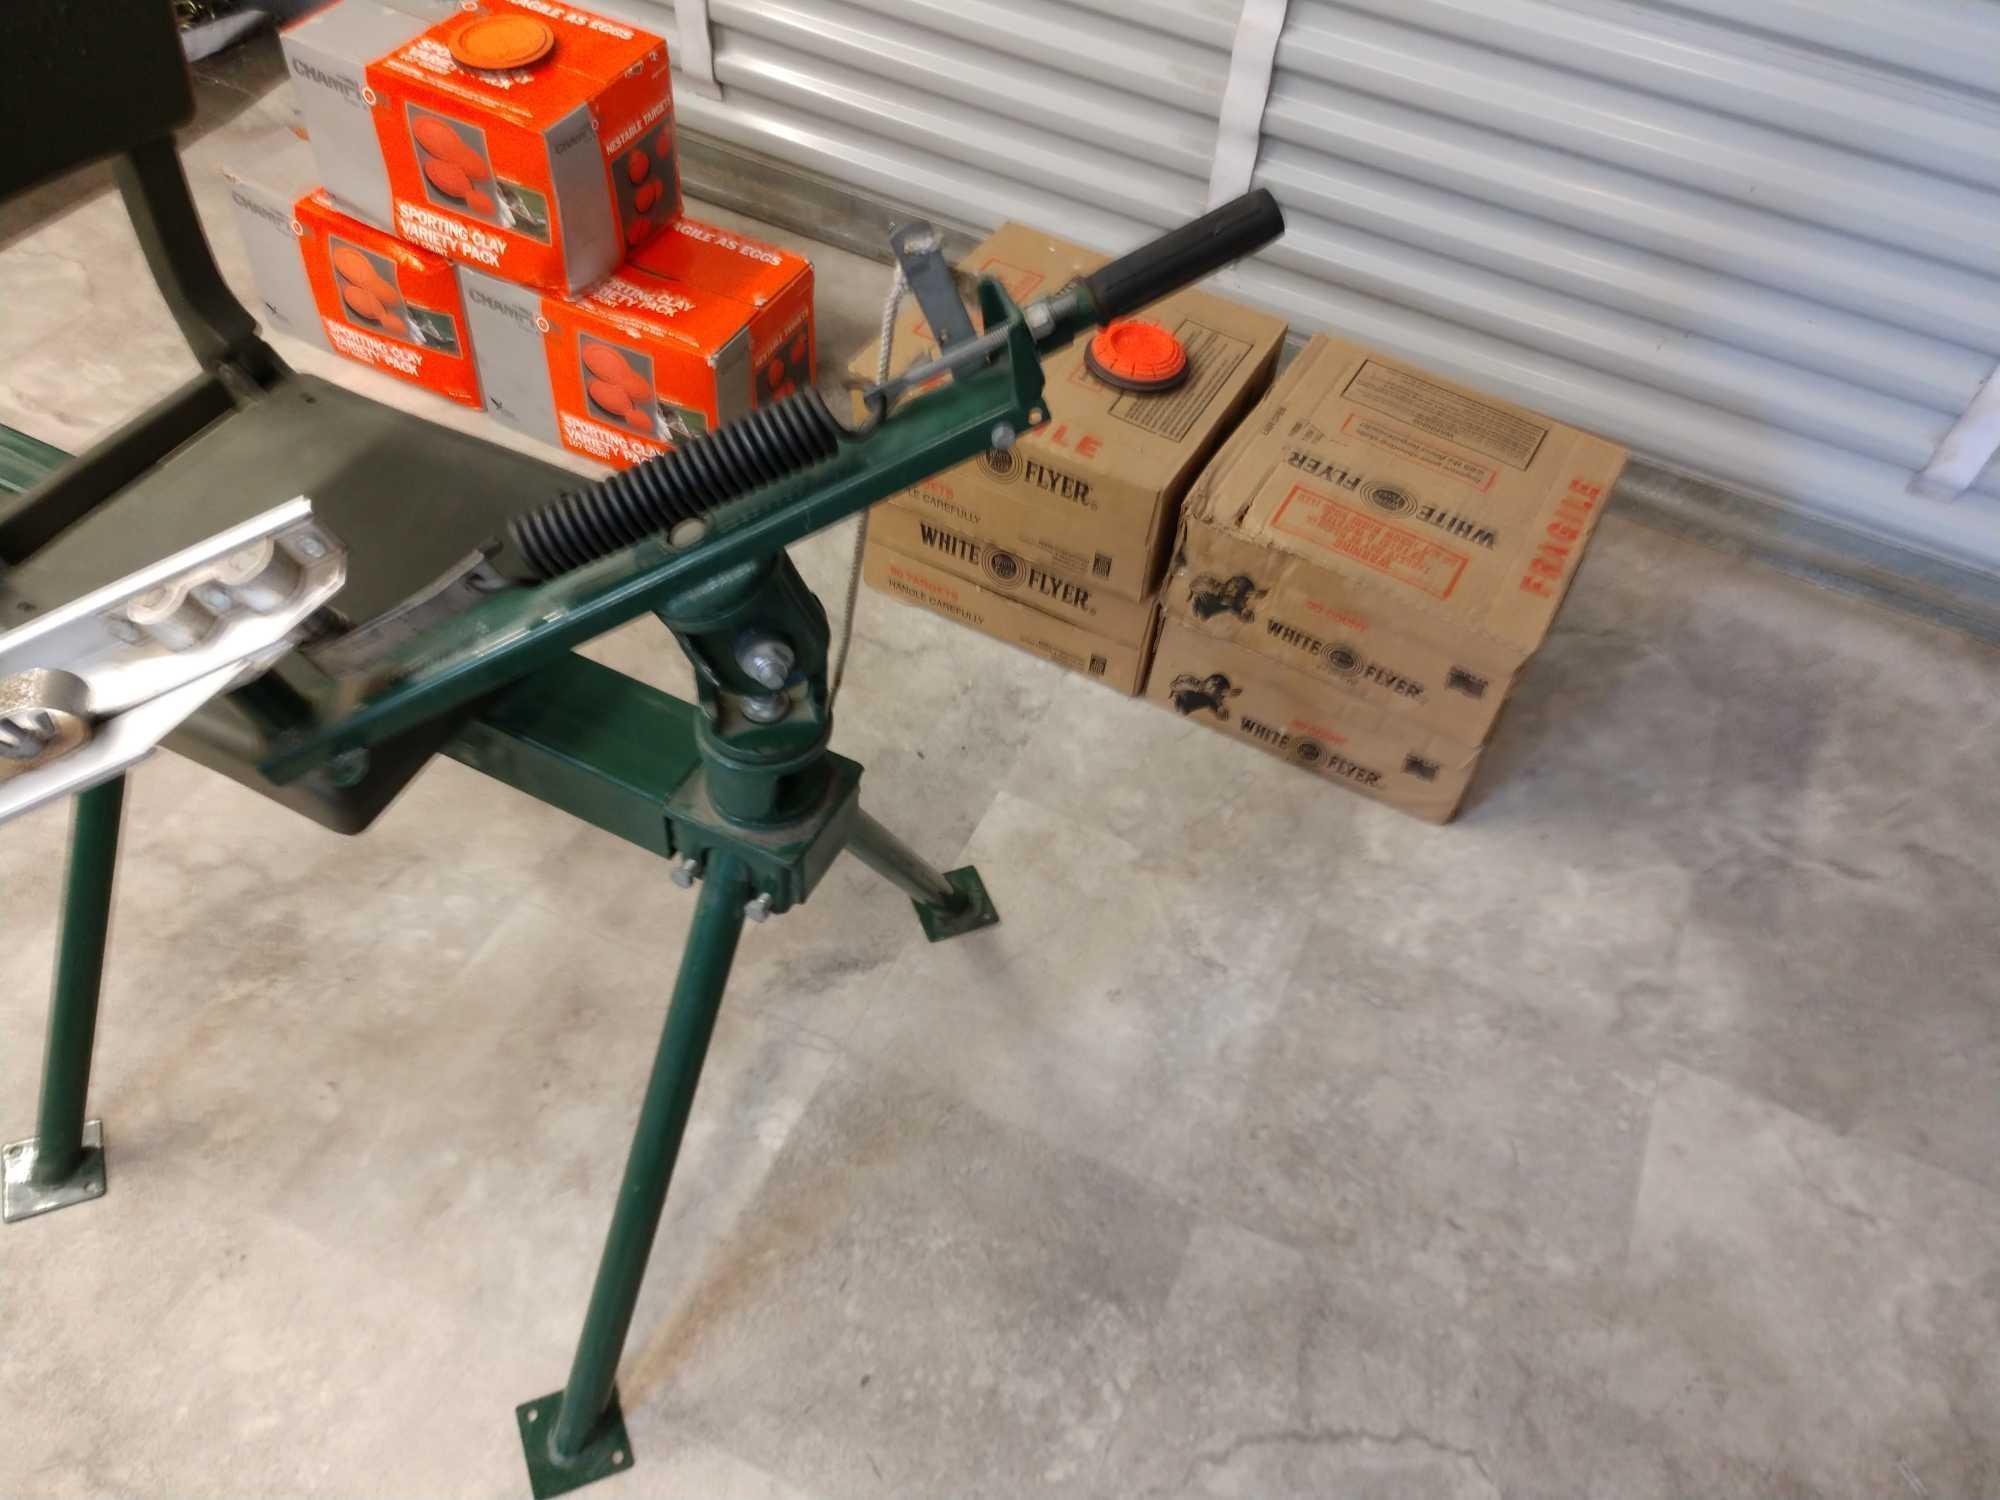 Truck hitch mounted clay pigeon thrower